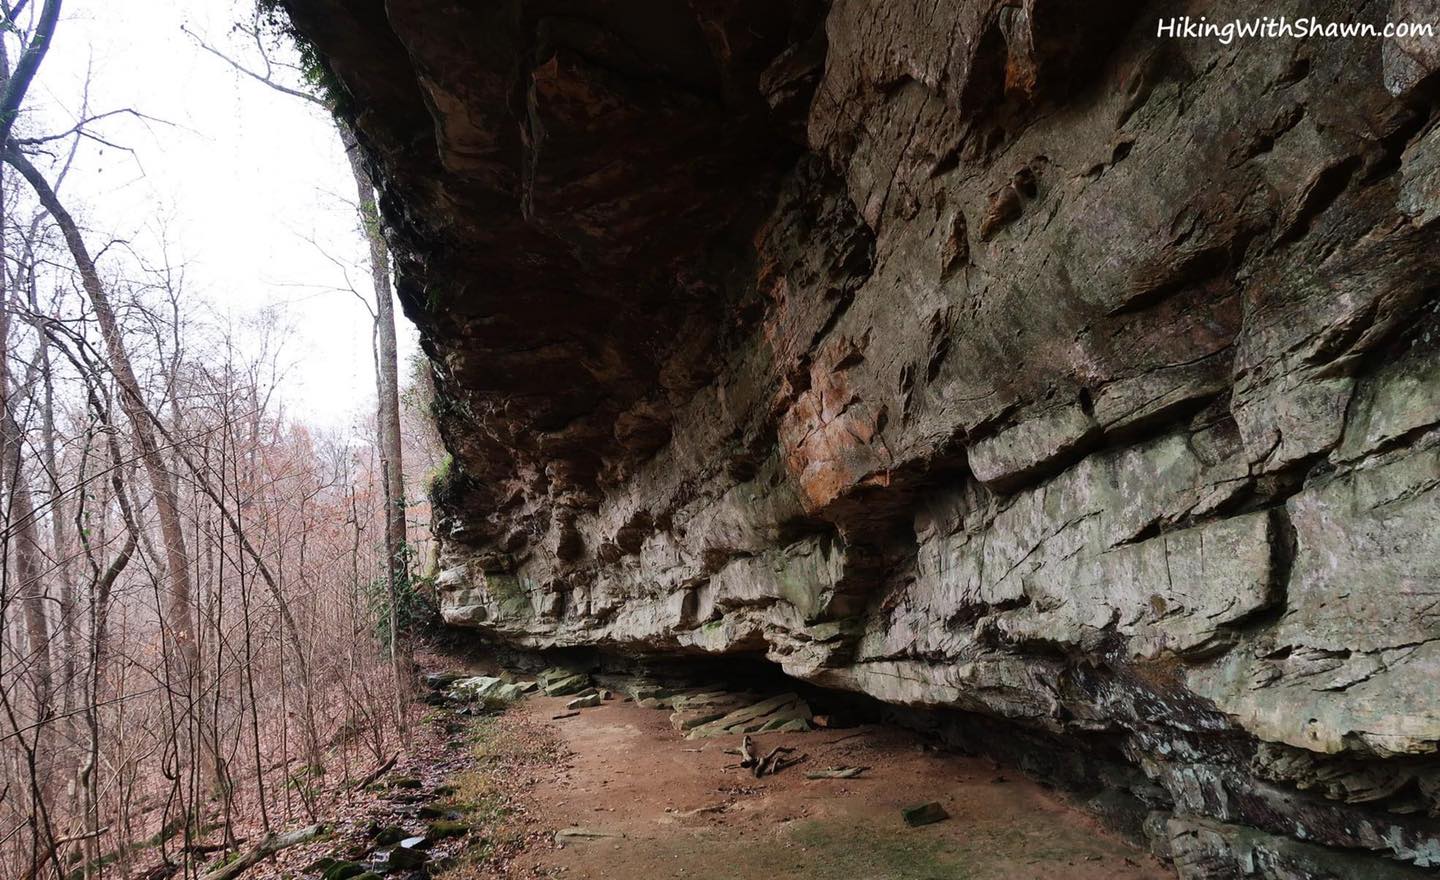 Southern Illinois Hiking Trails: Indian Creek Trail